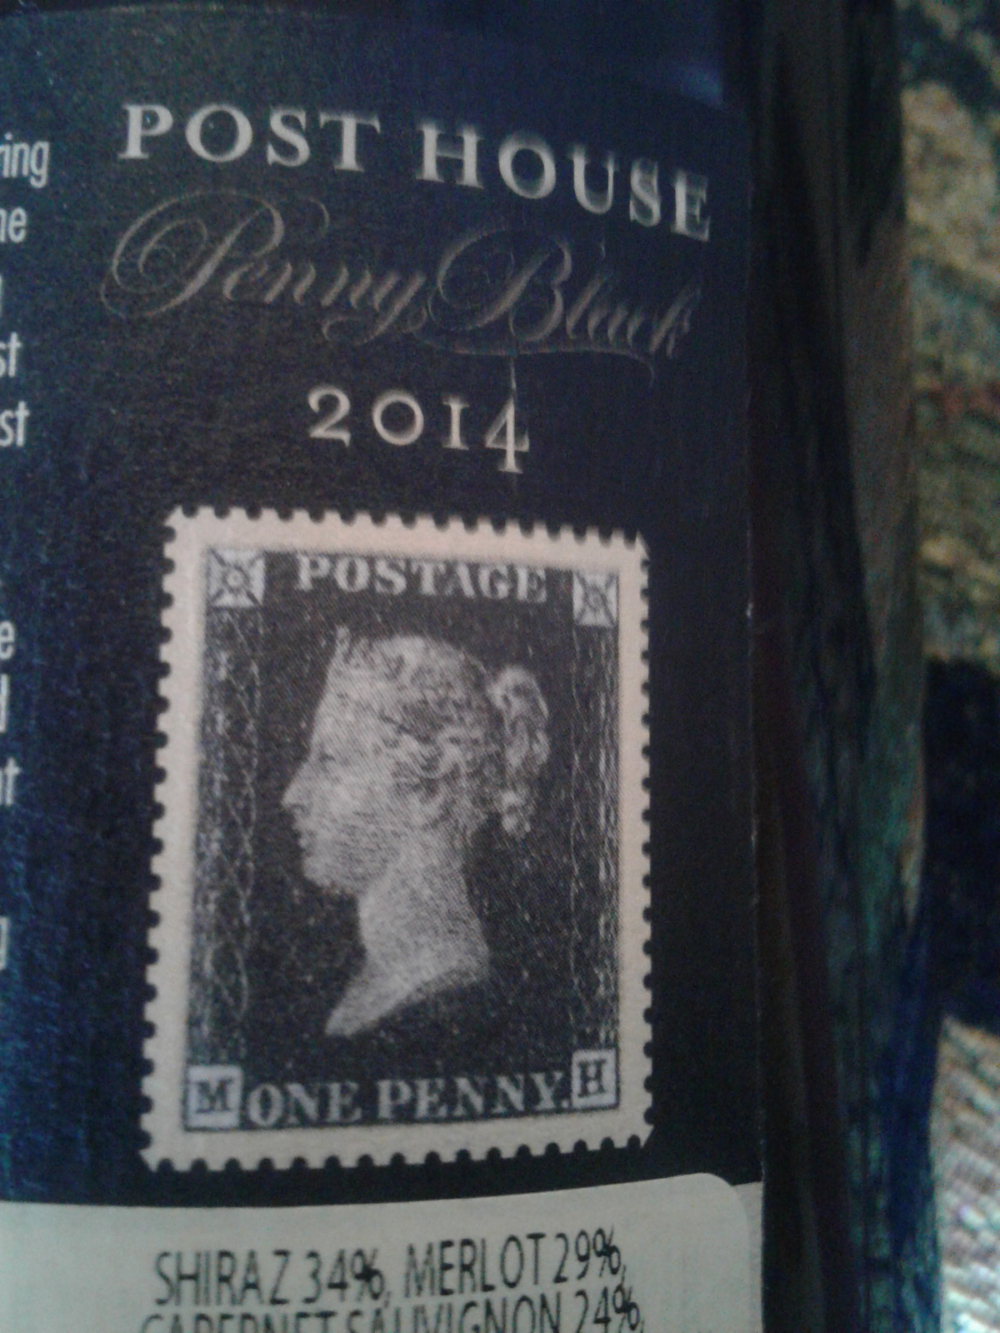 Every Post House wine carries a stamp. One of Queen Victoria graces the Penny Black bottle.